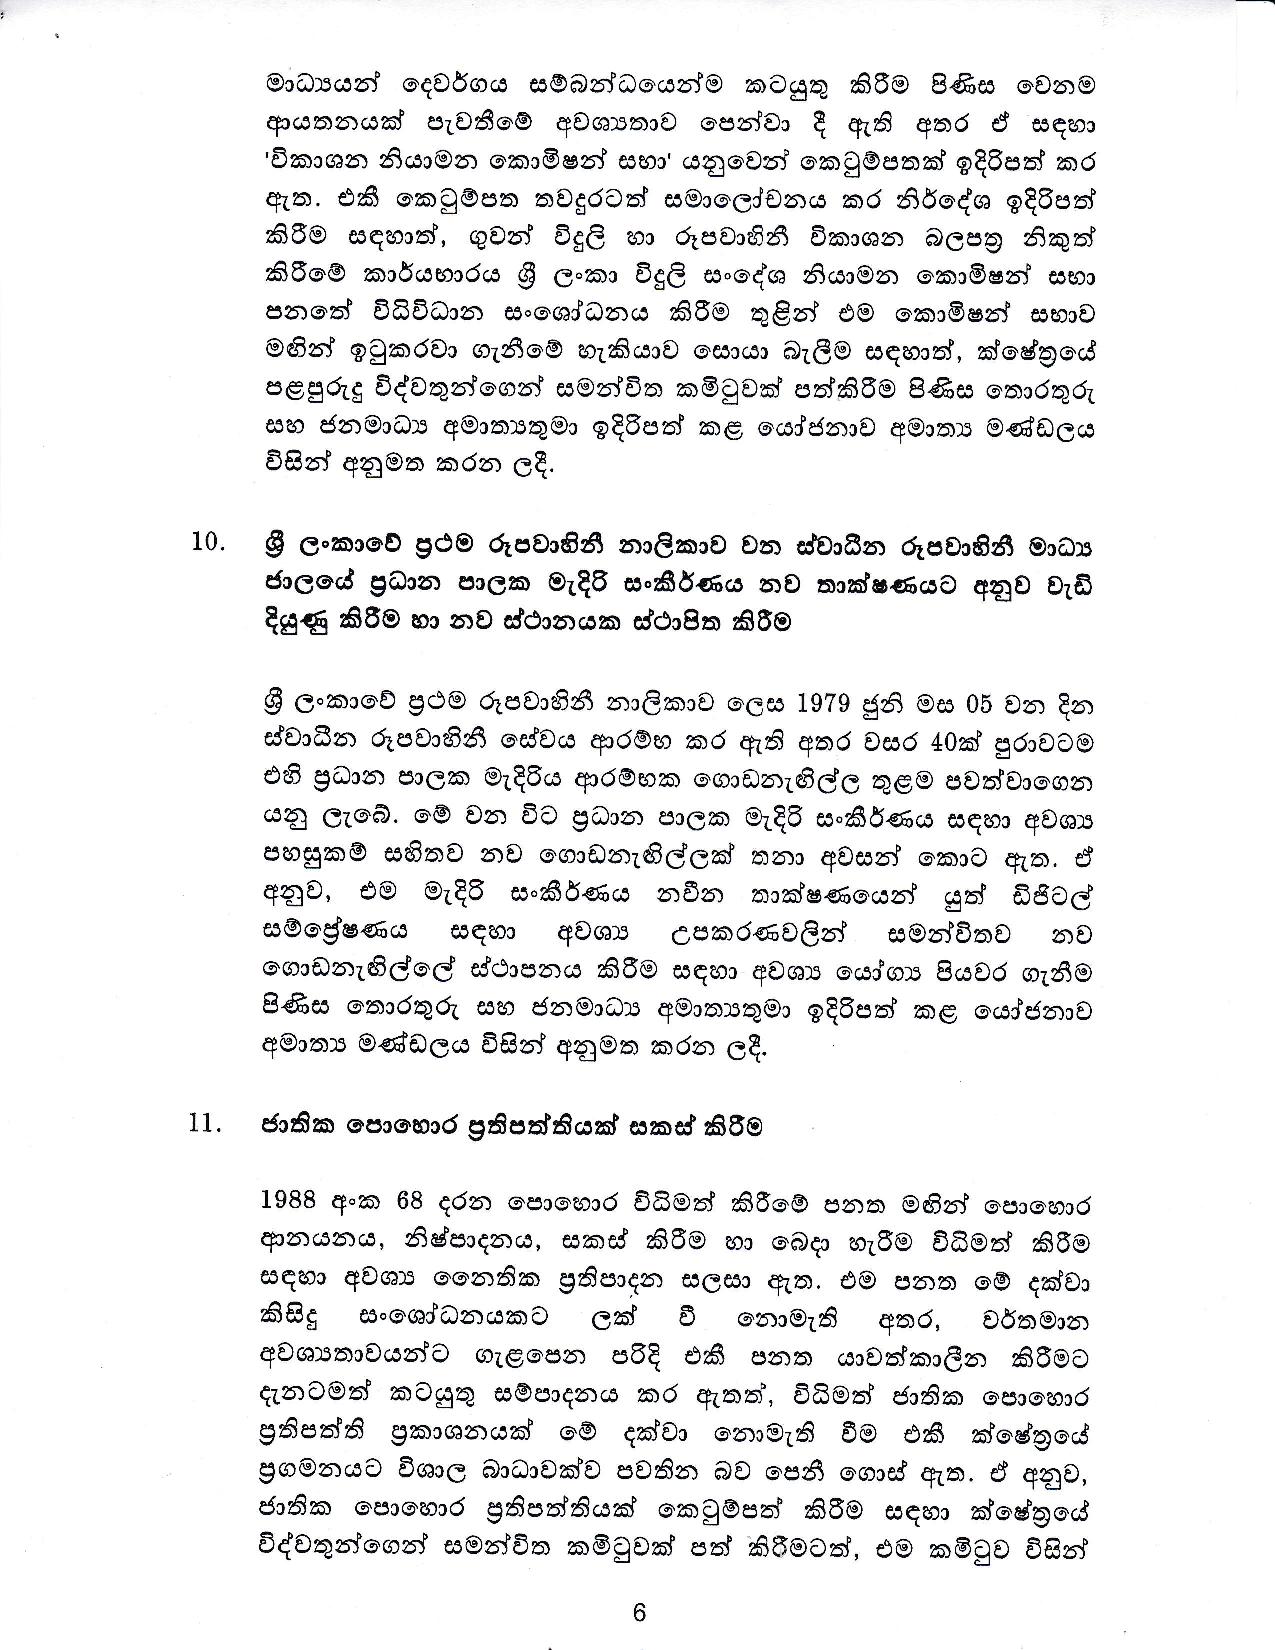 Cabinet Decision on 04.03.2020 page 006